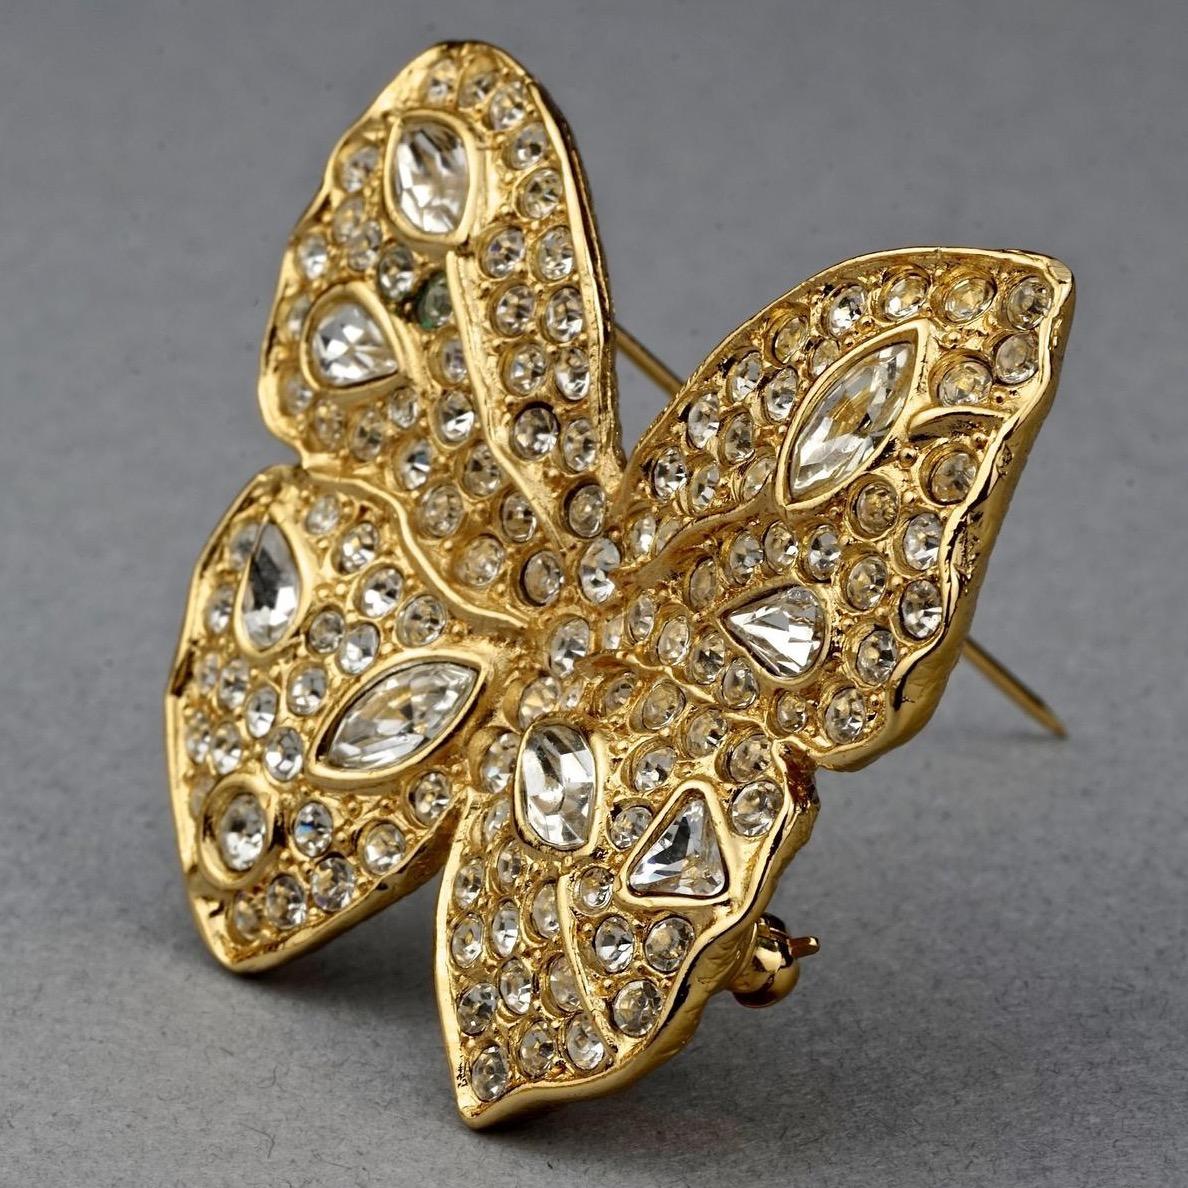 Vintage YVES SAINT LAURENT Ysl Butterfly Rhinestone Brooch

Measurements:
Height: 1.65 inches (4.2 cm)
Width: 1.81 inches (4.6 cm)

Features:
- 100% Authentic YVES SAINT LAURENT.
- Butterfly brooch studded with rhinestones.
- Signed YSL Made in